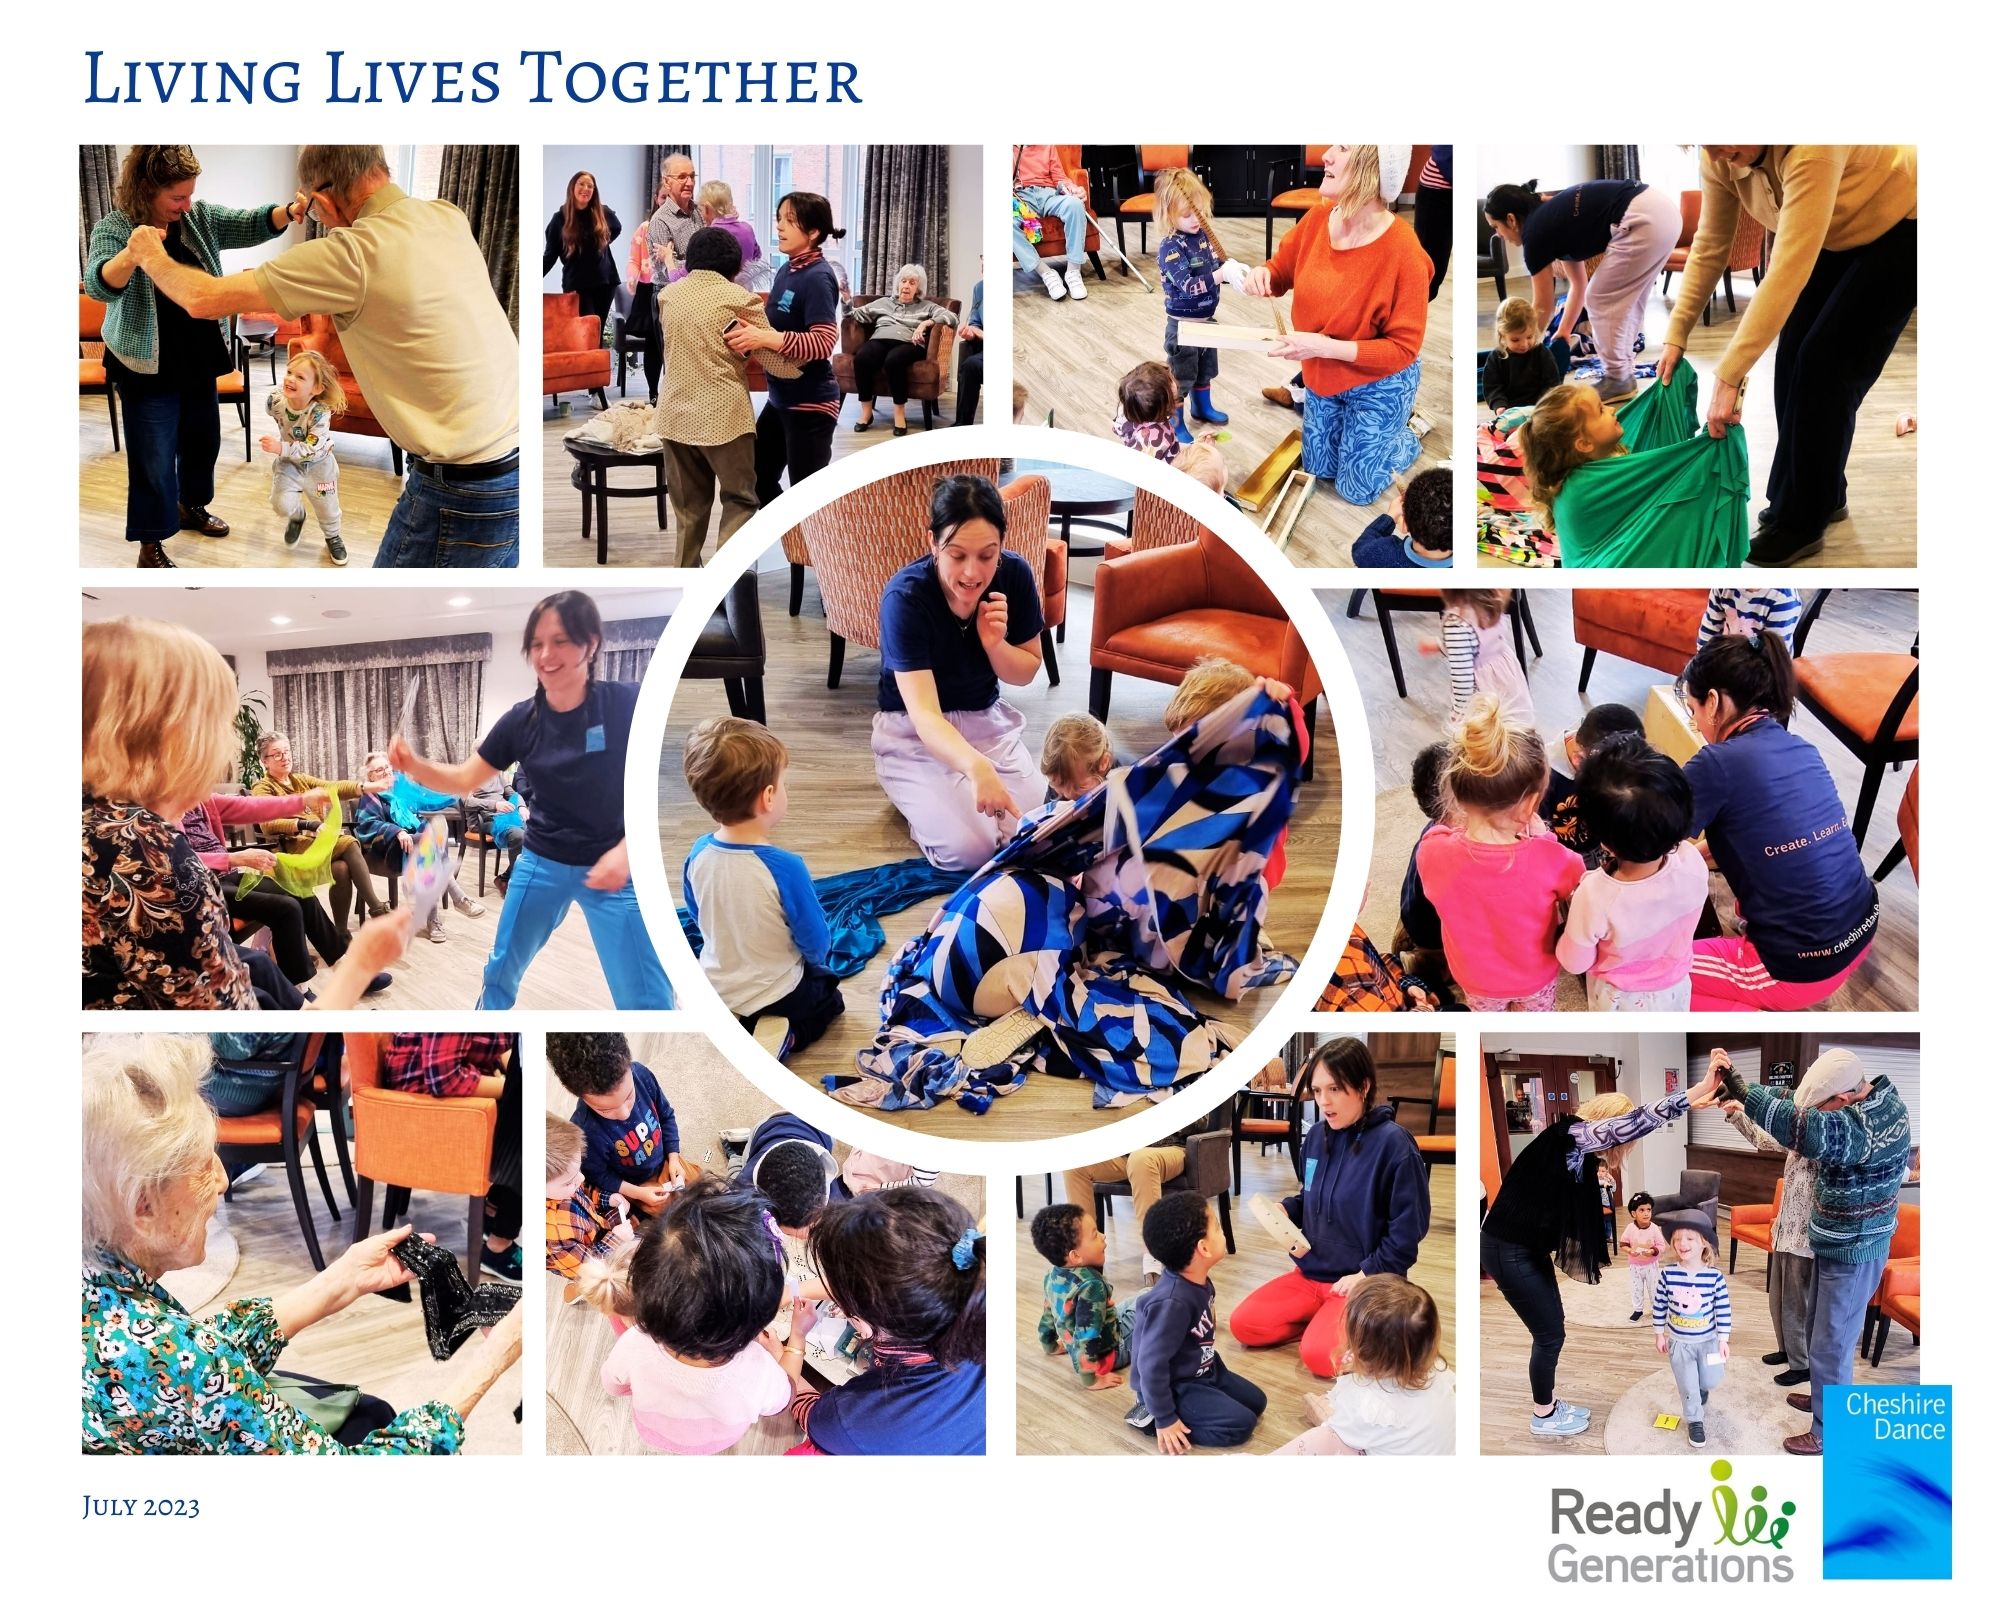 A collage of photos depicting activities with older people and young children